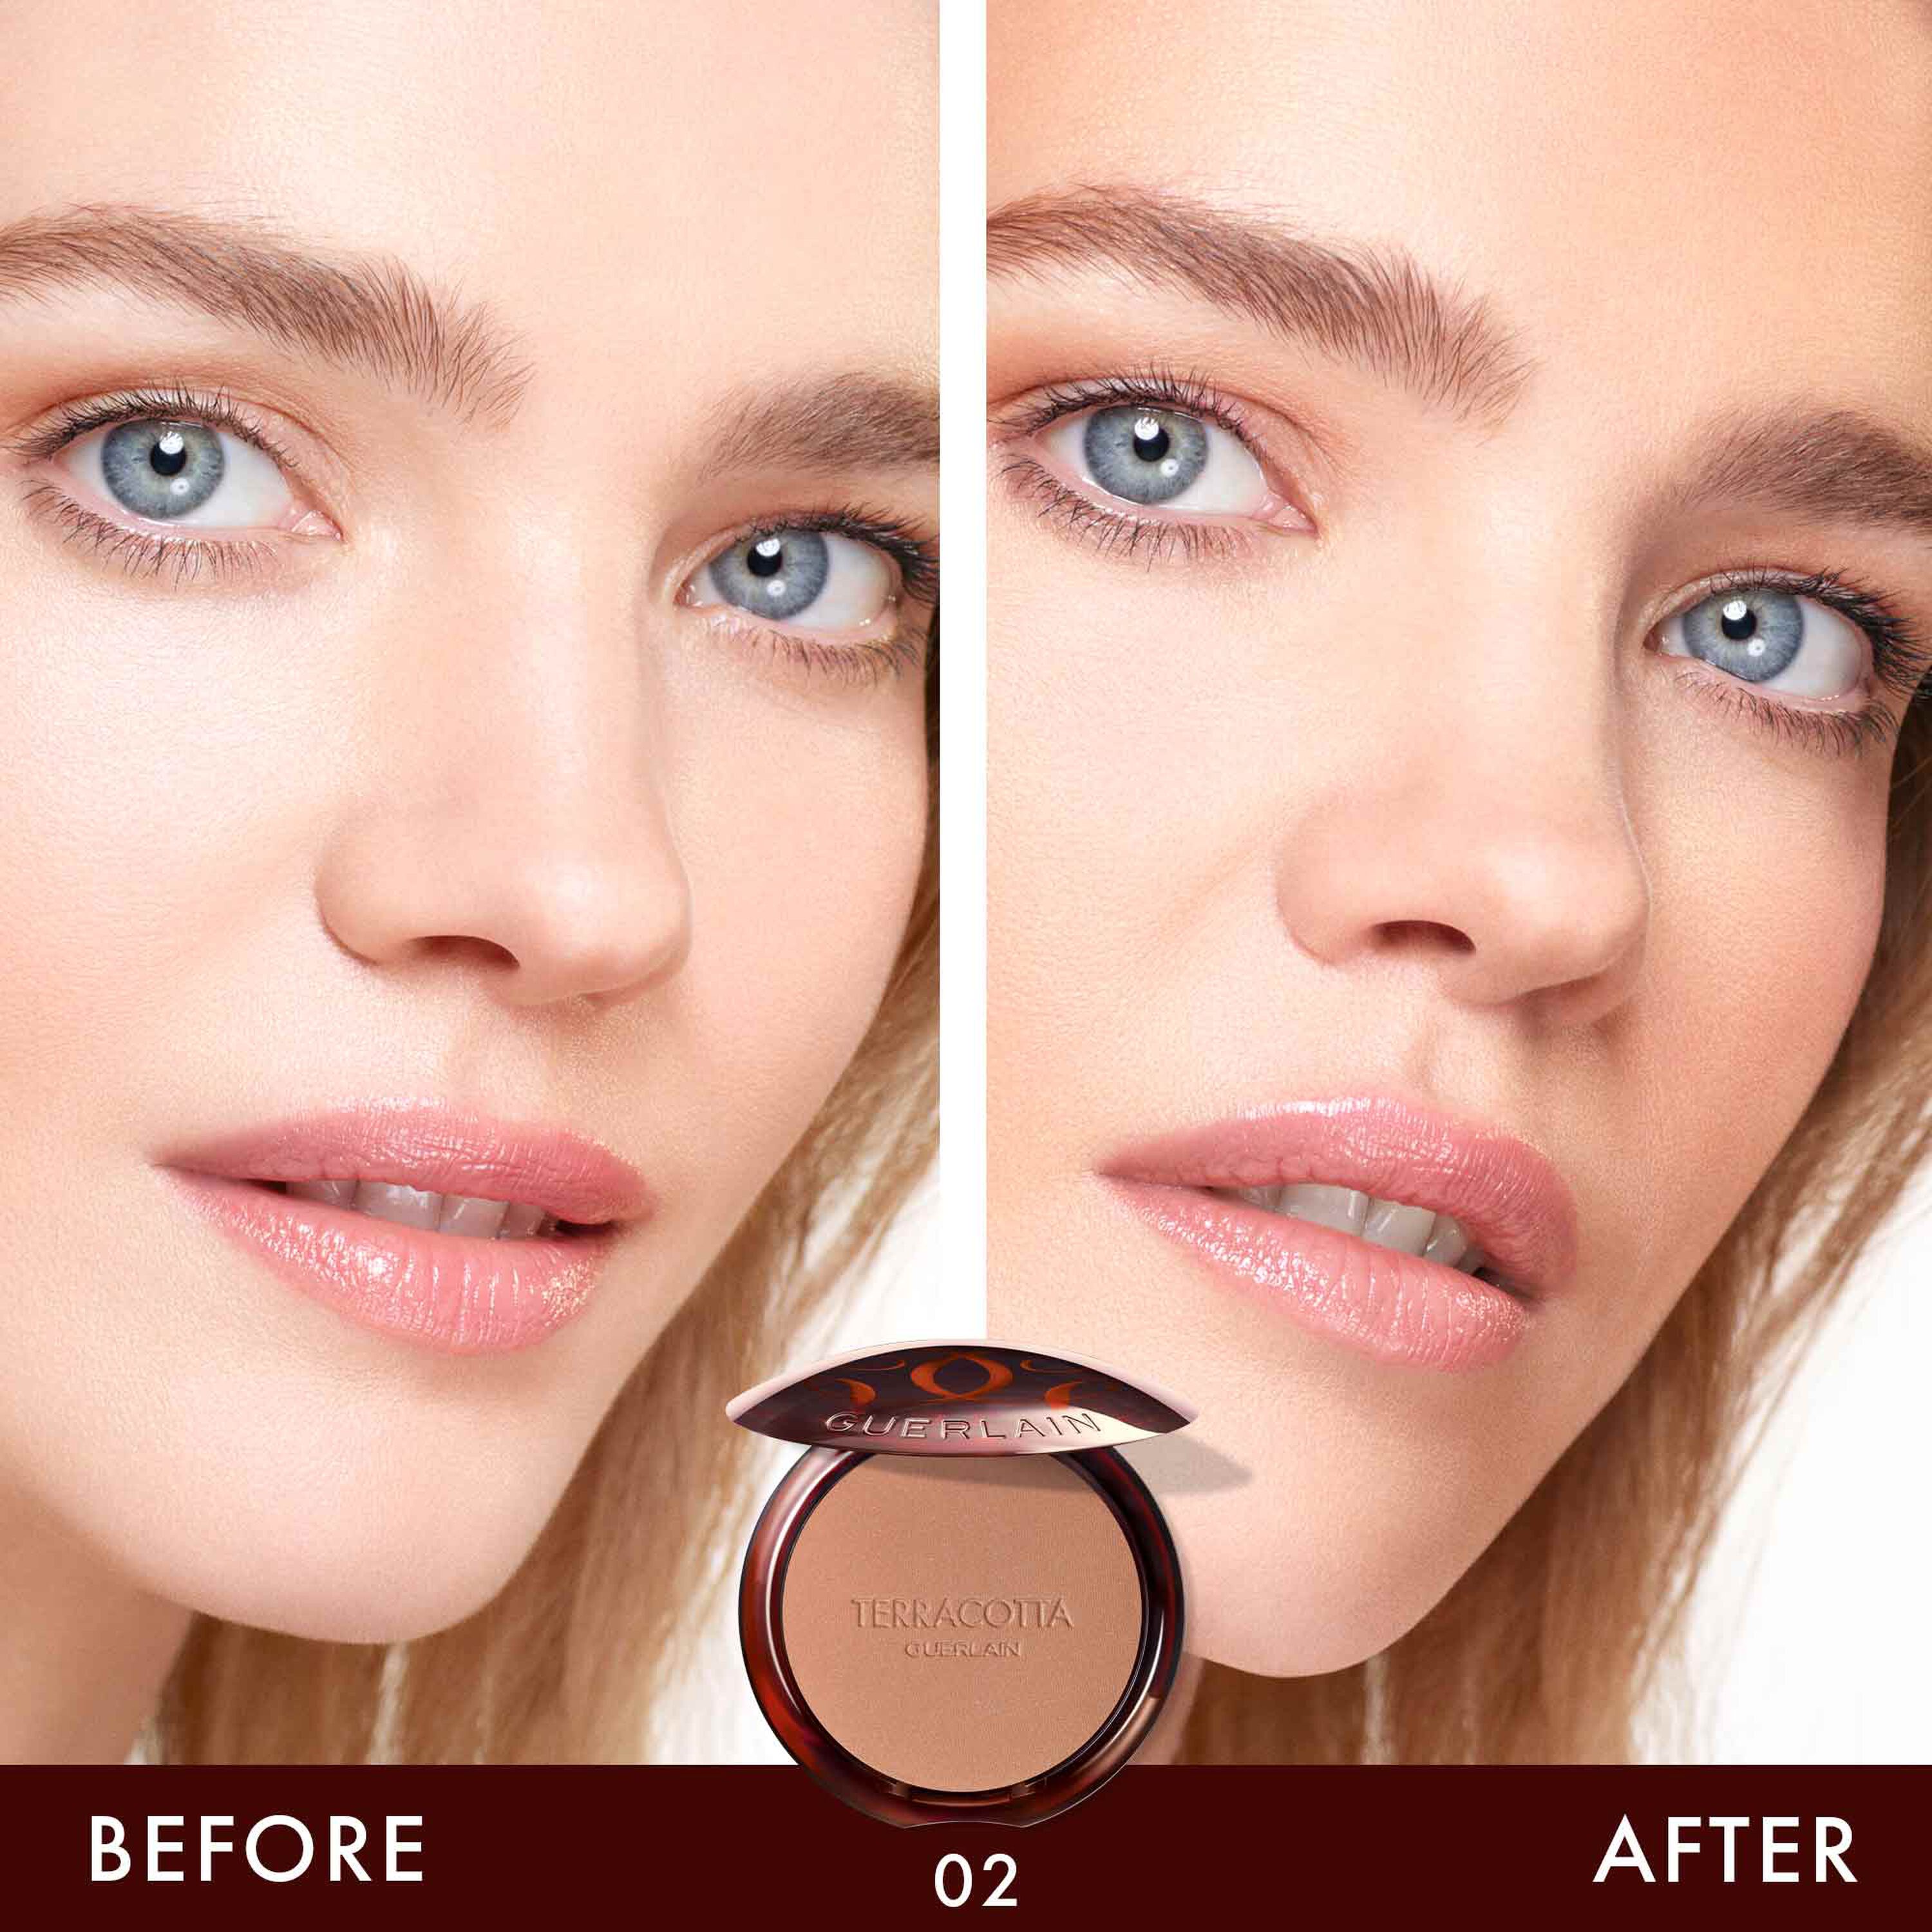 The Bronzing Powder - 96% naturally-derived ingredients (See the picture 3/5)